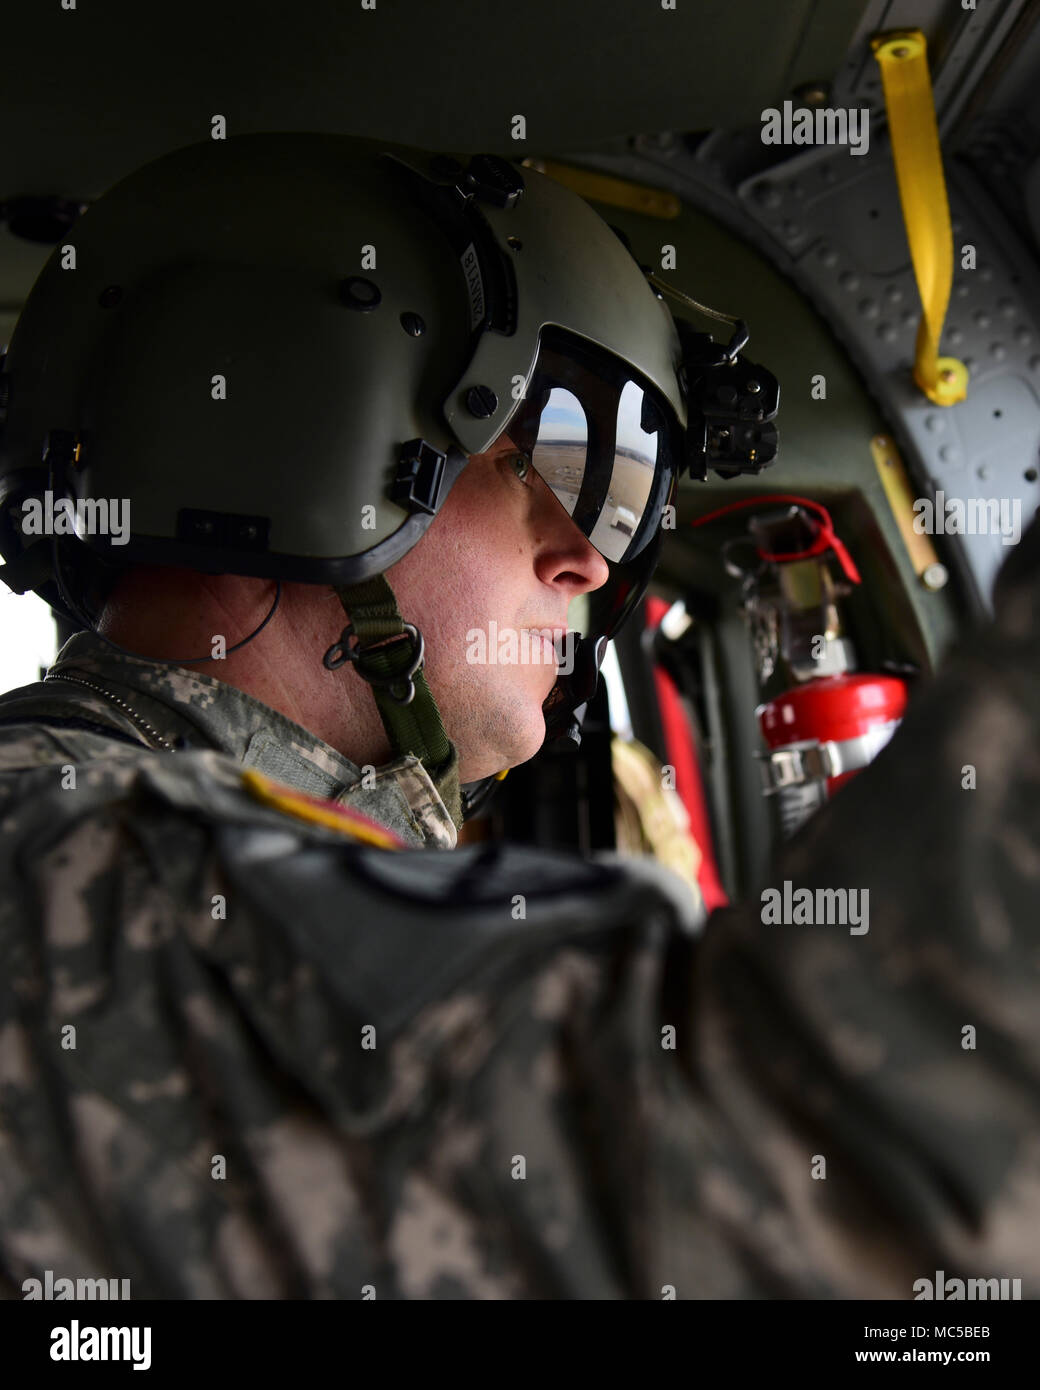 A U.S. Army crew chief with the 1-135th Assault Helicopter Battalion looks out a window of a UH-60 Black Hawk during a joint training mission at Whiteman Air Force Base, Mo., Jan. 31, 2018. In addition to establishing a partnership, the purpose of the training was to familiarize Joint Terminal Attack Controllers from the 7th Air Support Operations Squadron, located in Fort Bliss, Texas, with the assets available at Whiteman AFB that are used in a multi-domain fight. (U.S. Air Force photo by Staff Sgt. Danielle Quilla) Stock Photo